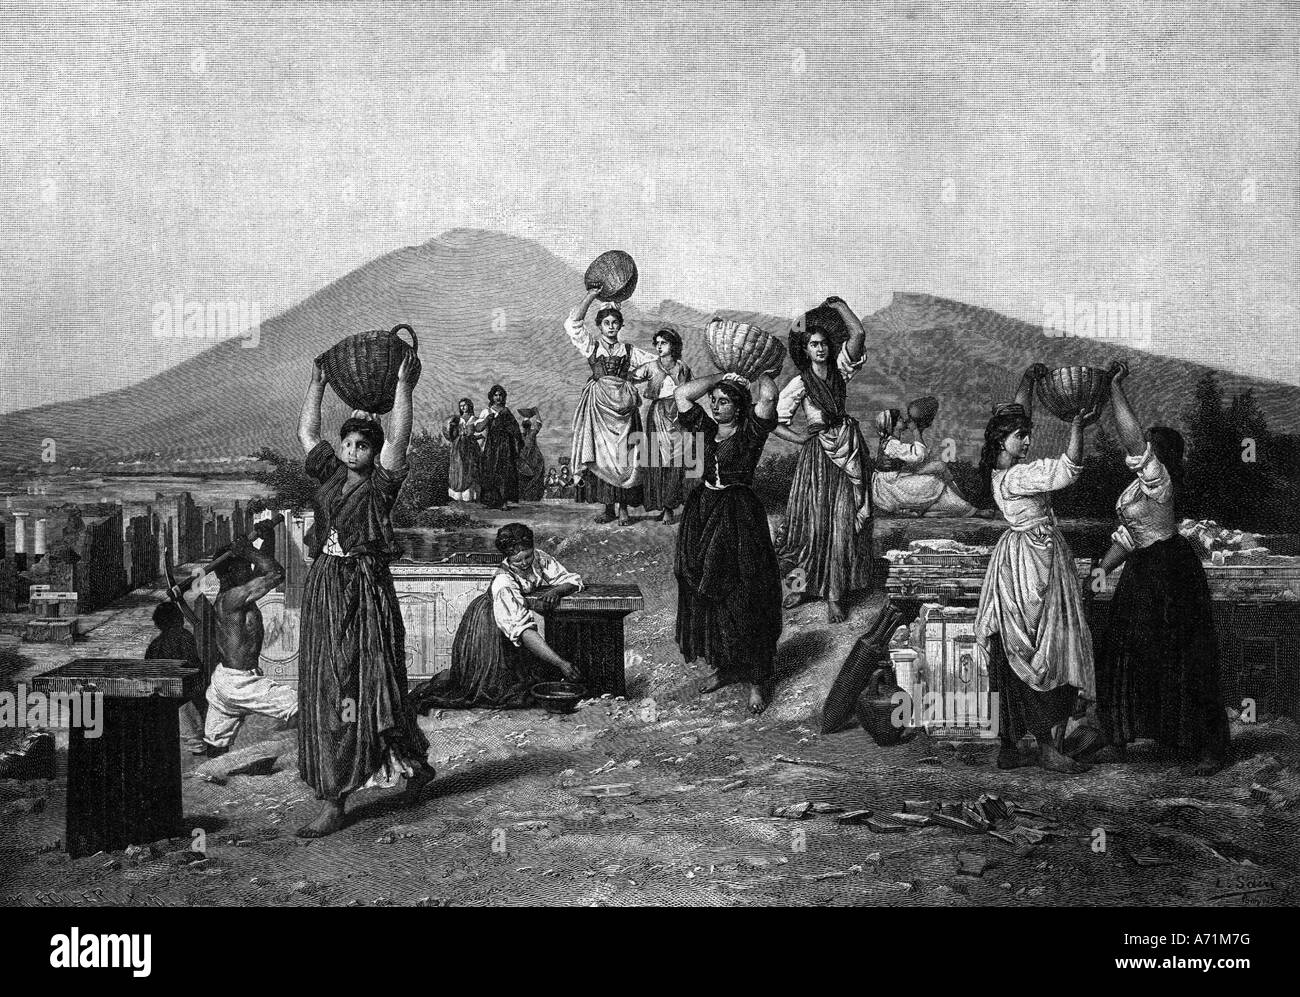 geography / travel, Italy, Pompeii, archaeology / archeology, excavation, 19th century, engraving after painting by Edouard Sain (1830 - 1910), historic, historical, Europe, excavations, women, work, baskets, Pompei, unskilled workers, Pompeji, Pompej, UNESCO World Cultural Heritage Site / Sites, people, ancient world, Stock Photo